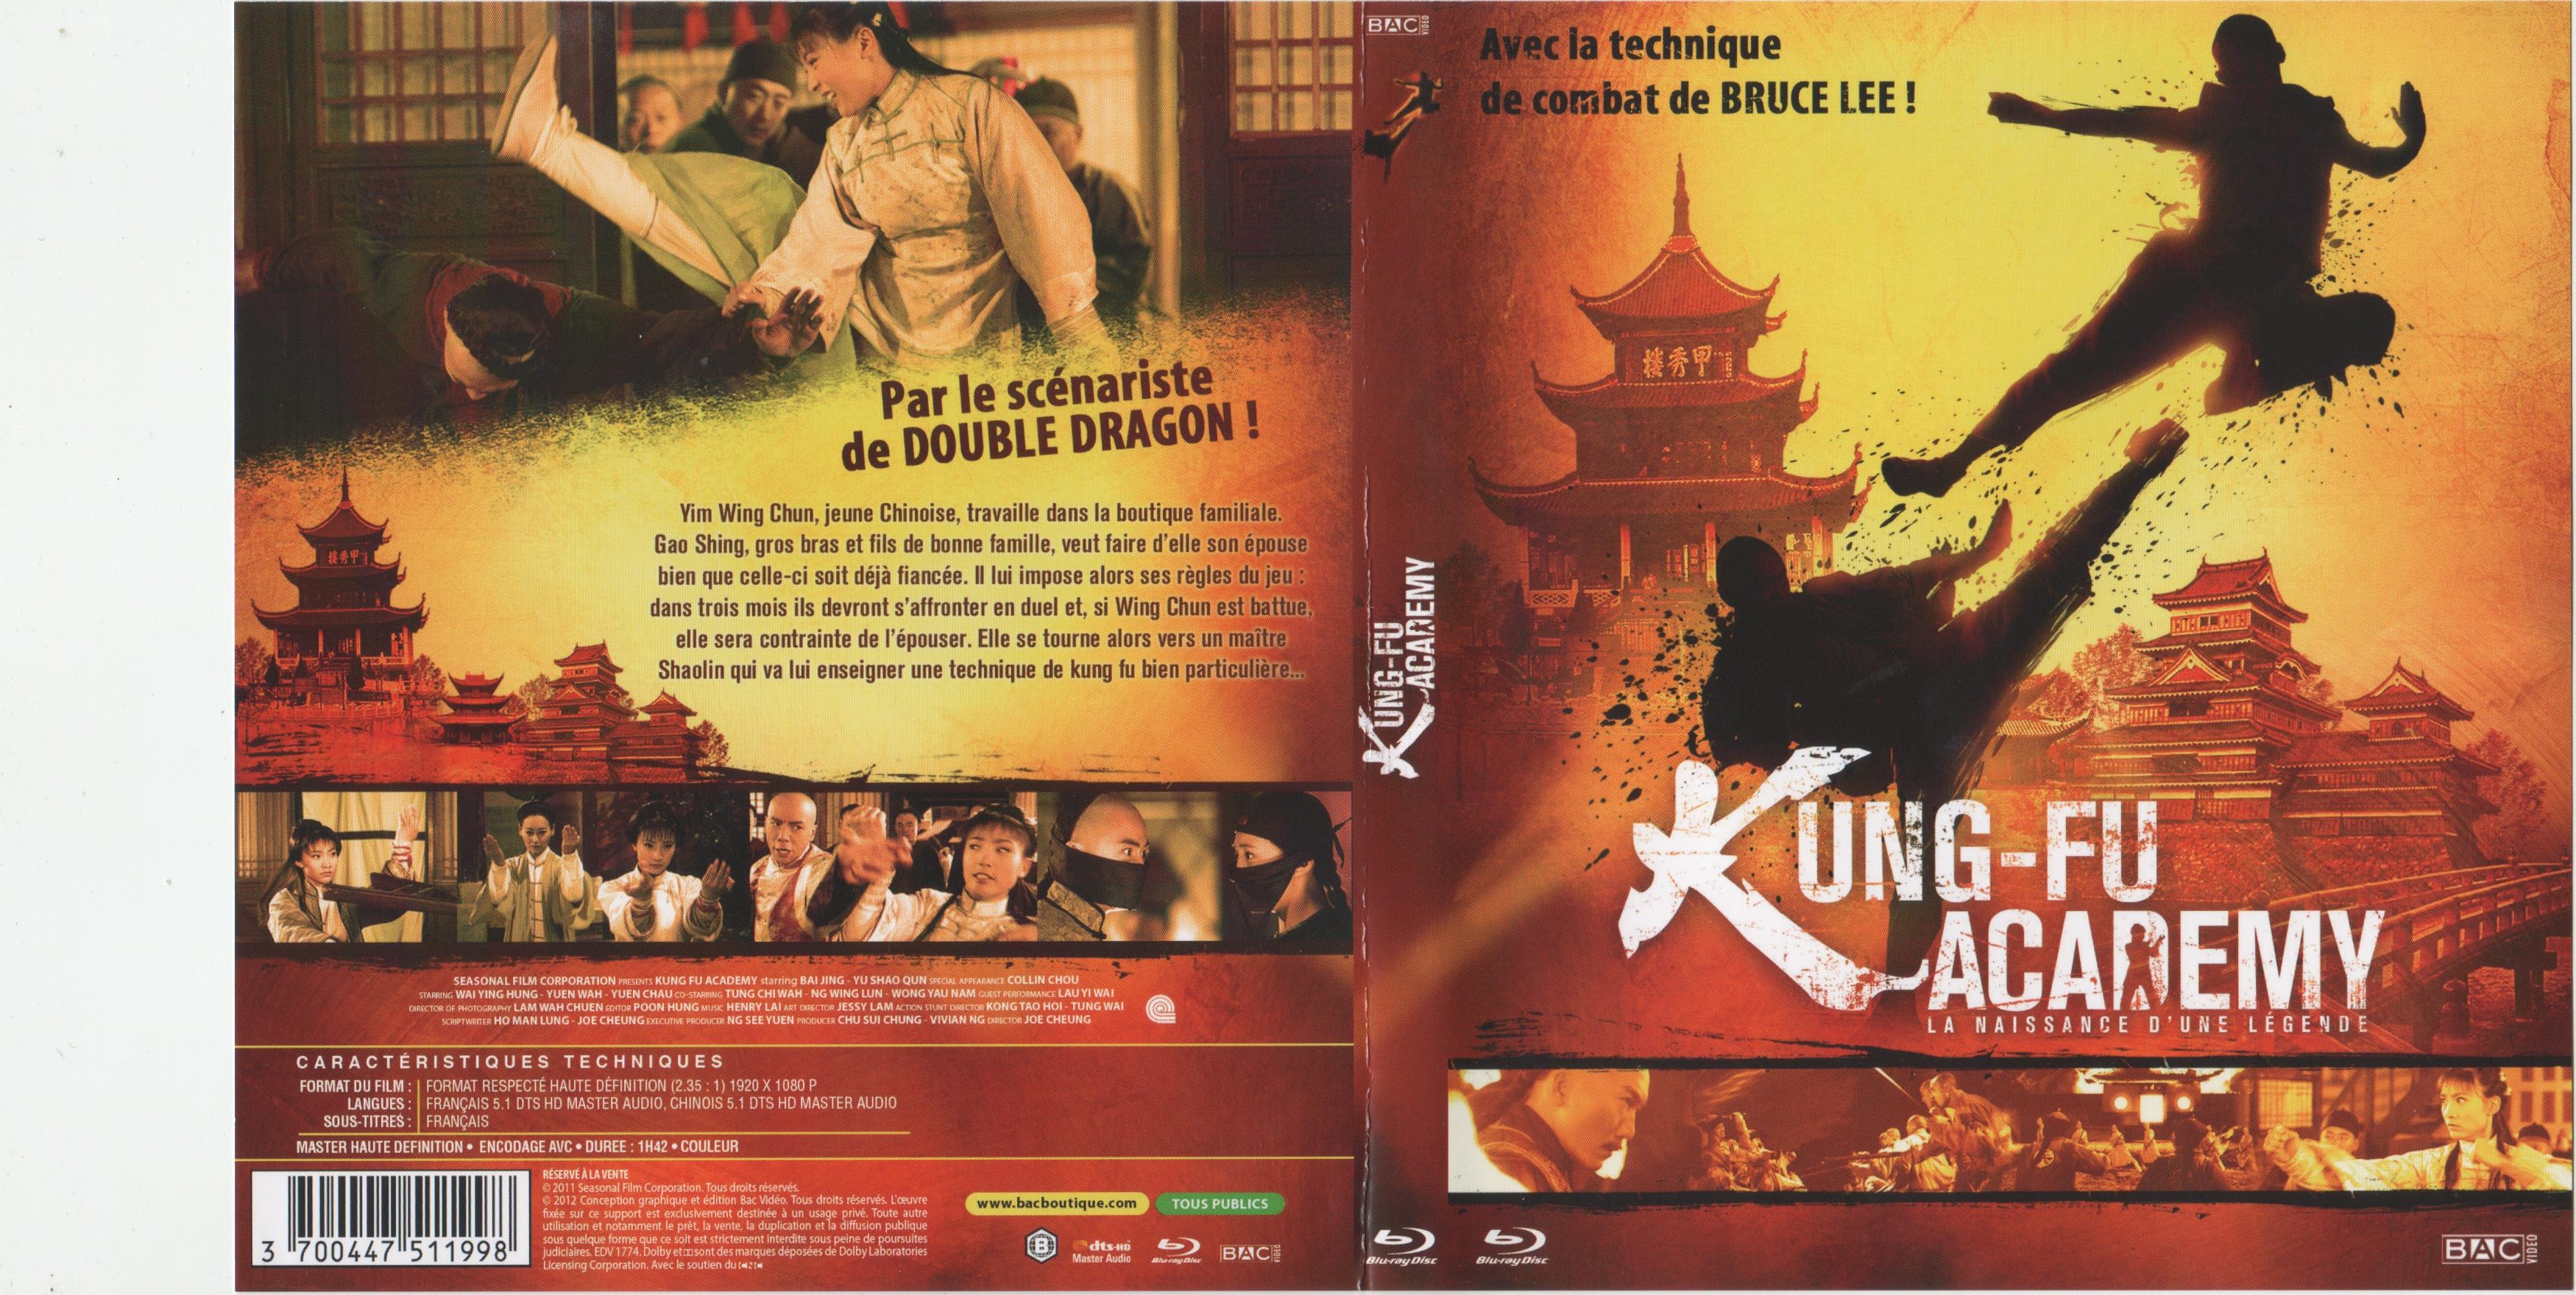 Jaquette DVD Kung-fu academy (BLU-RAY)